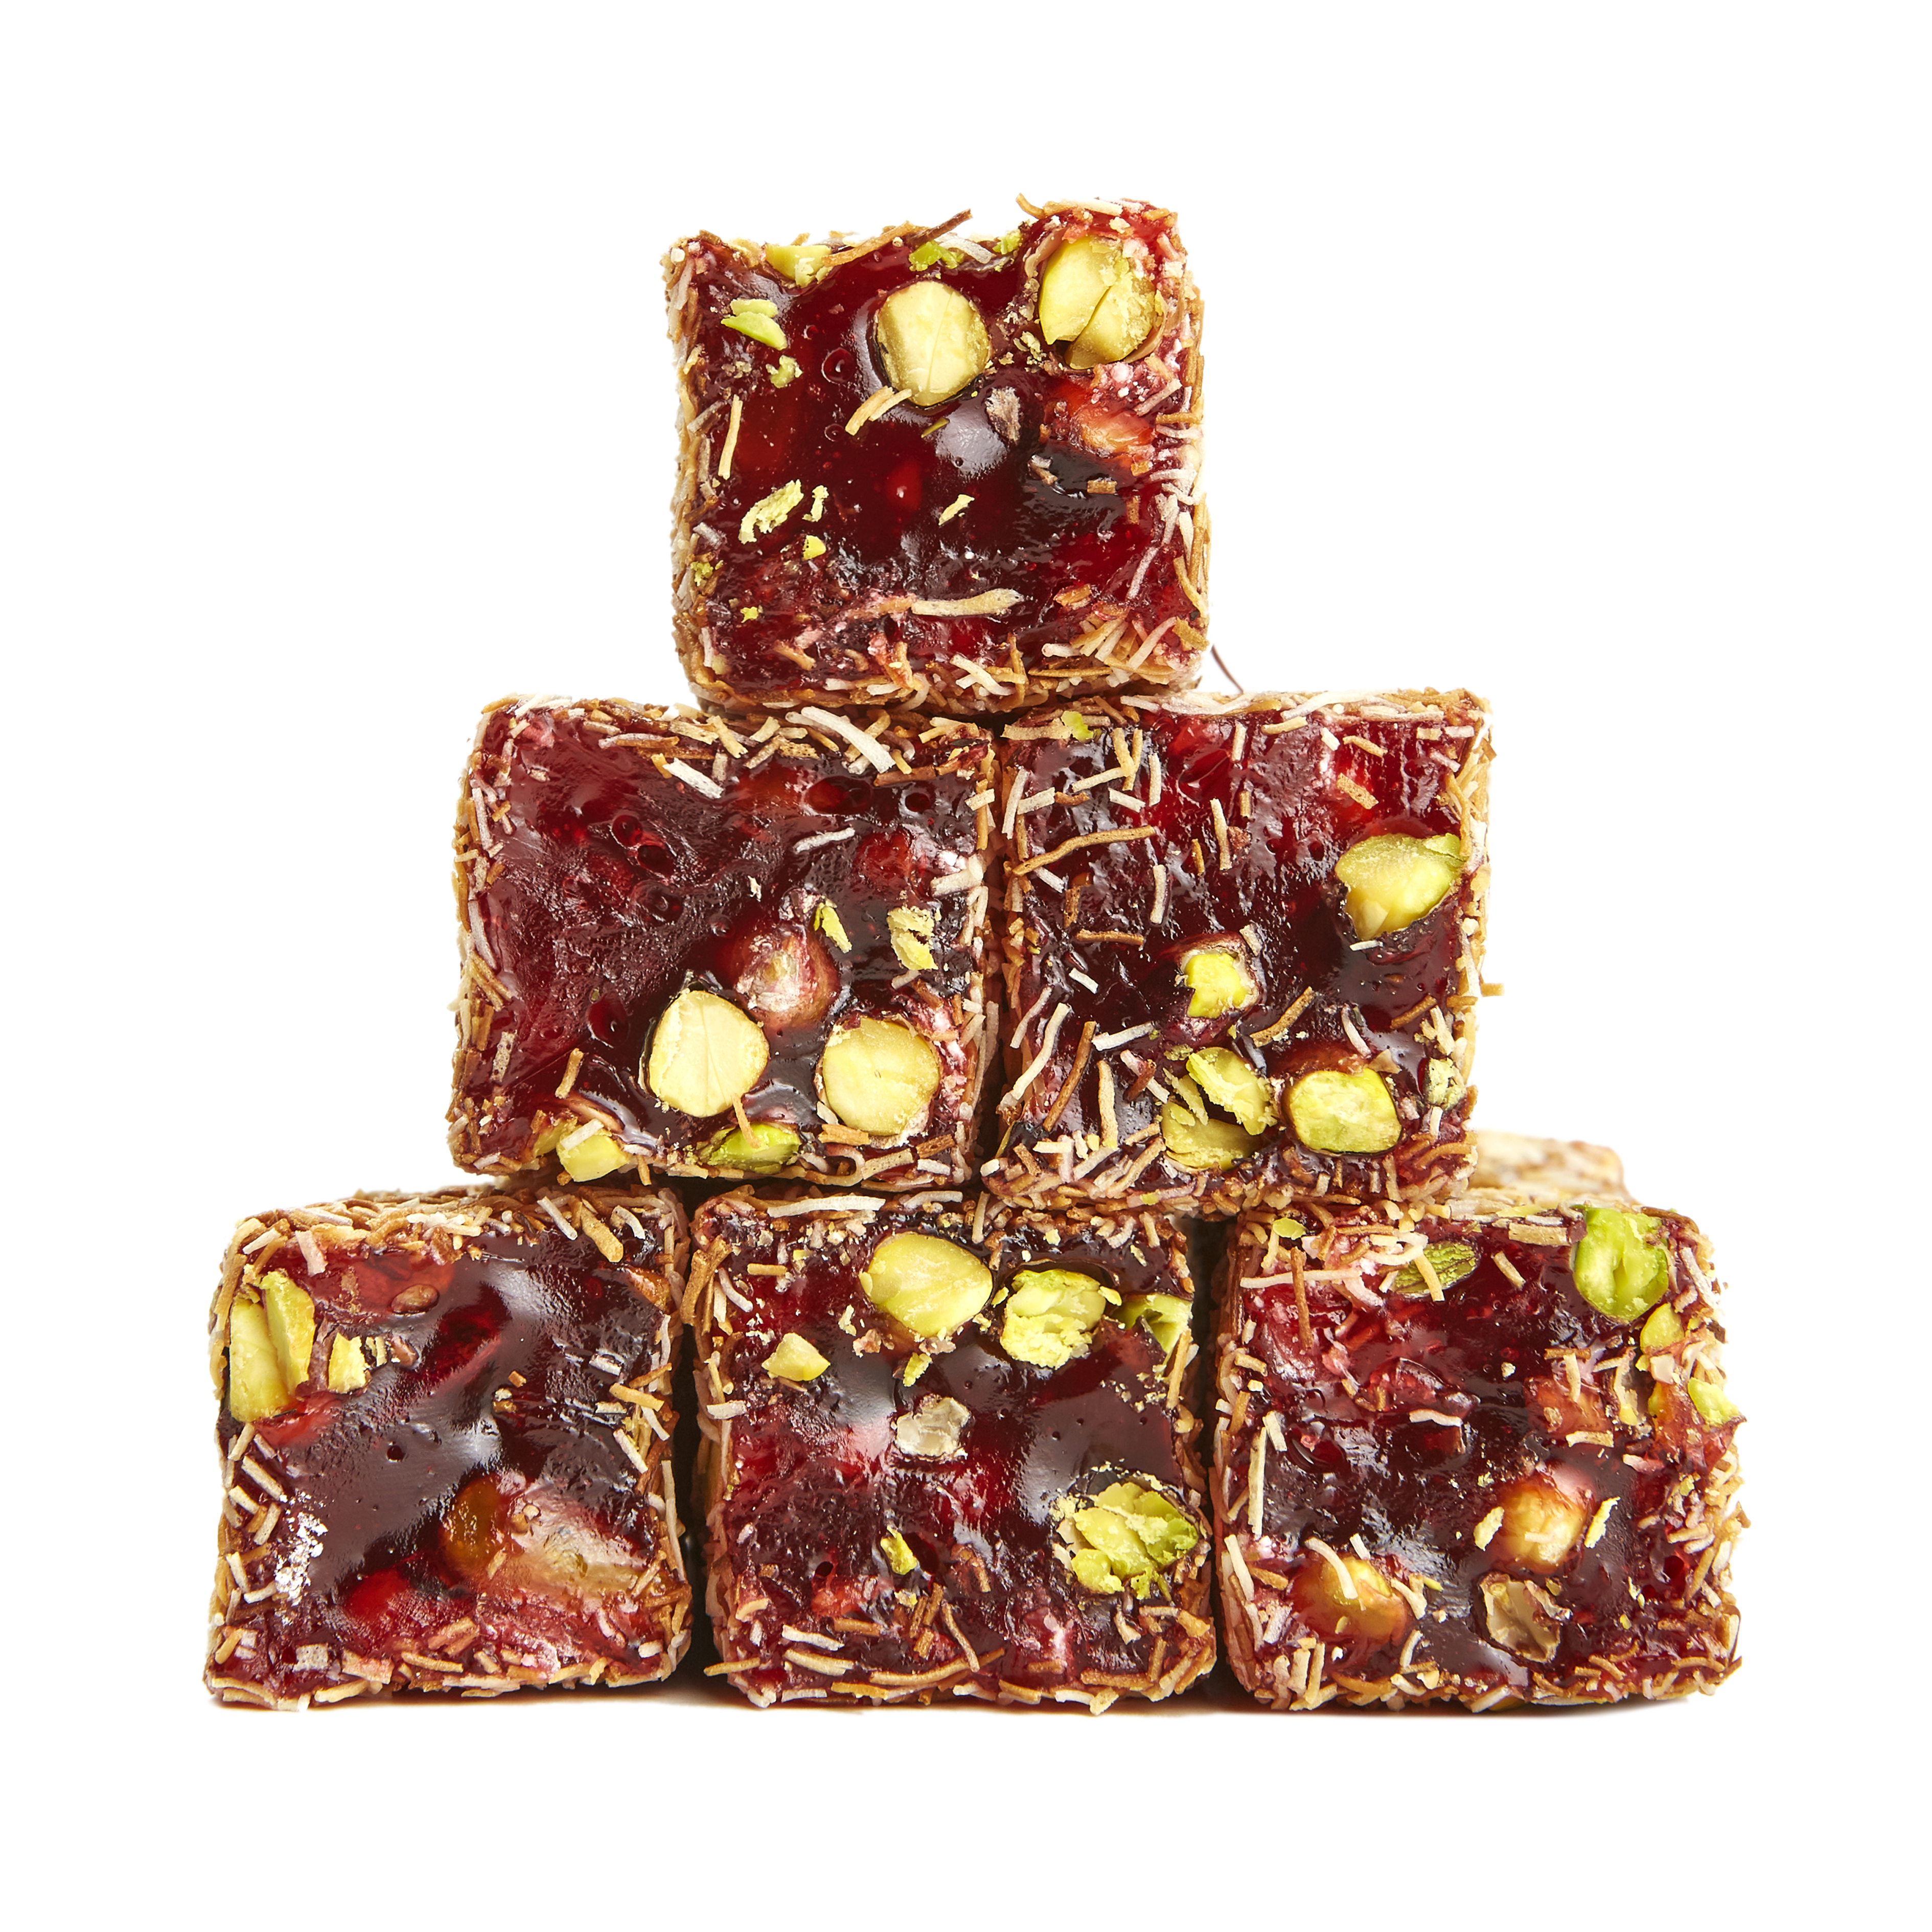 Shredded Wheat, Pomegranate and Pistachios Turkish Delight